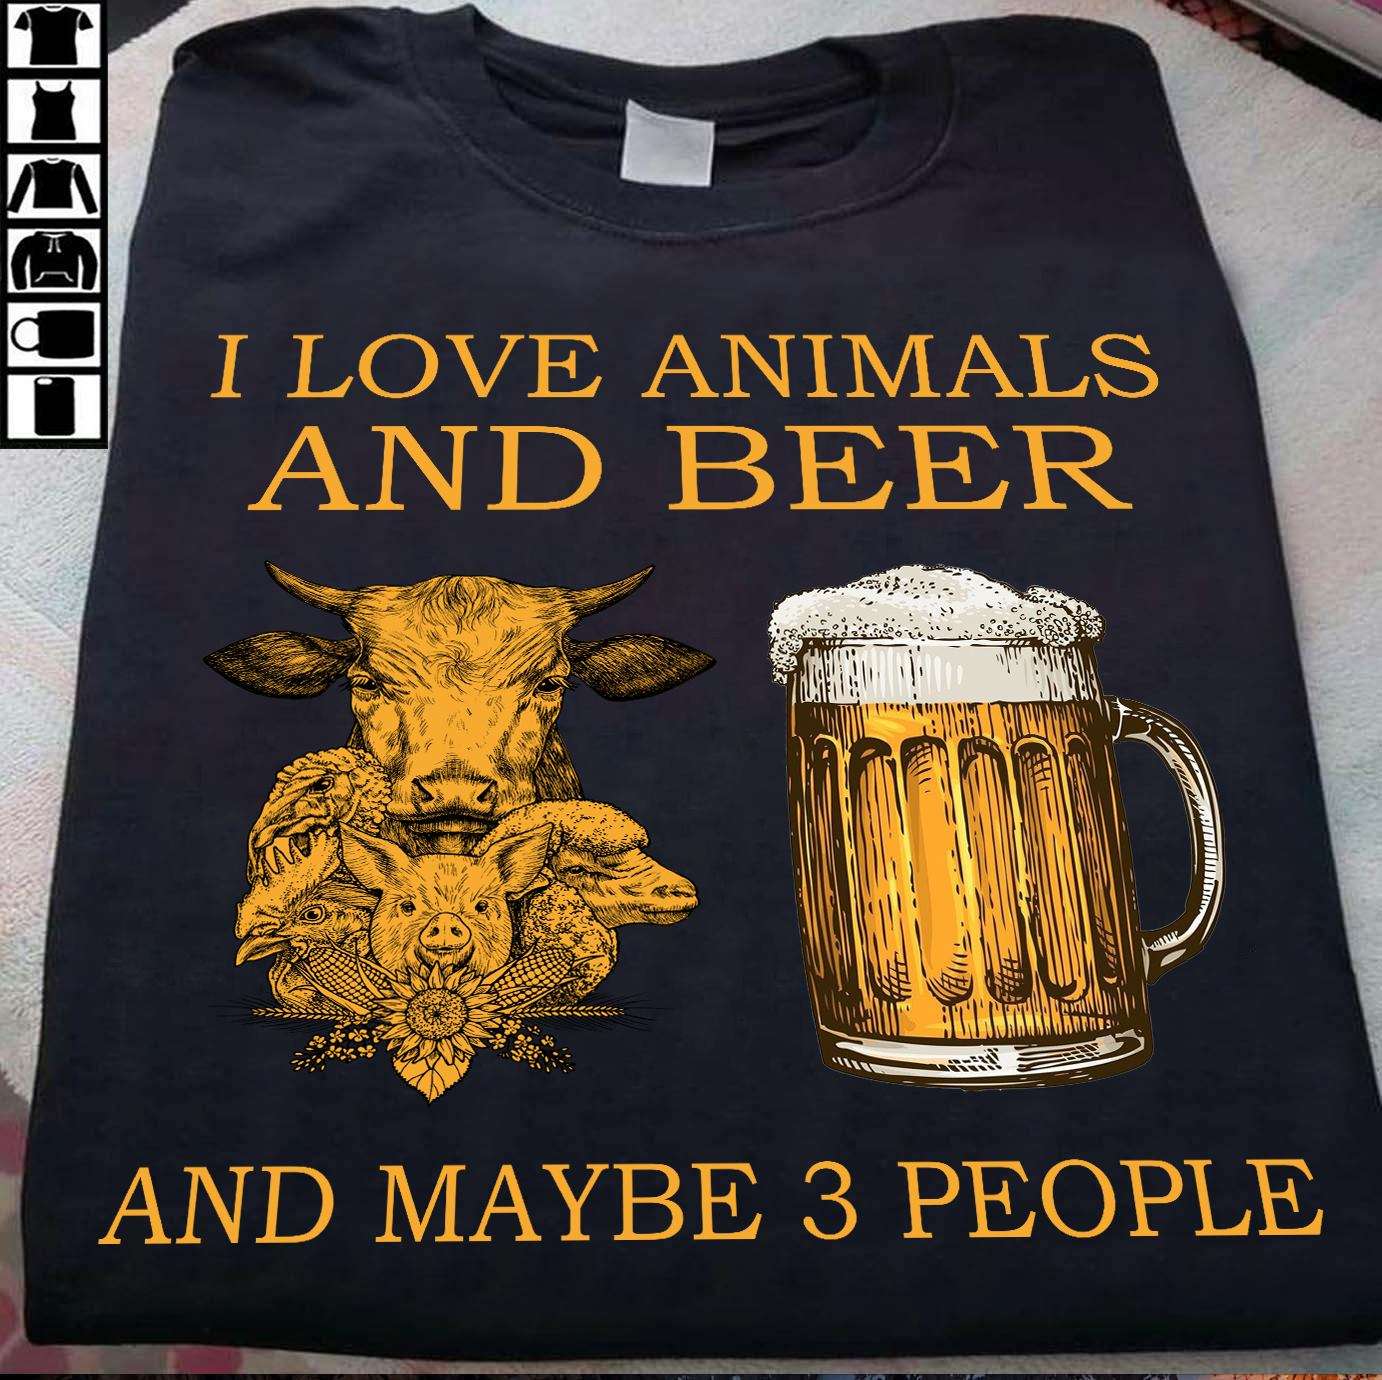 I love animals and beer and maybe 3 people - Beer lover